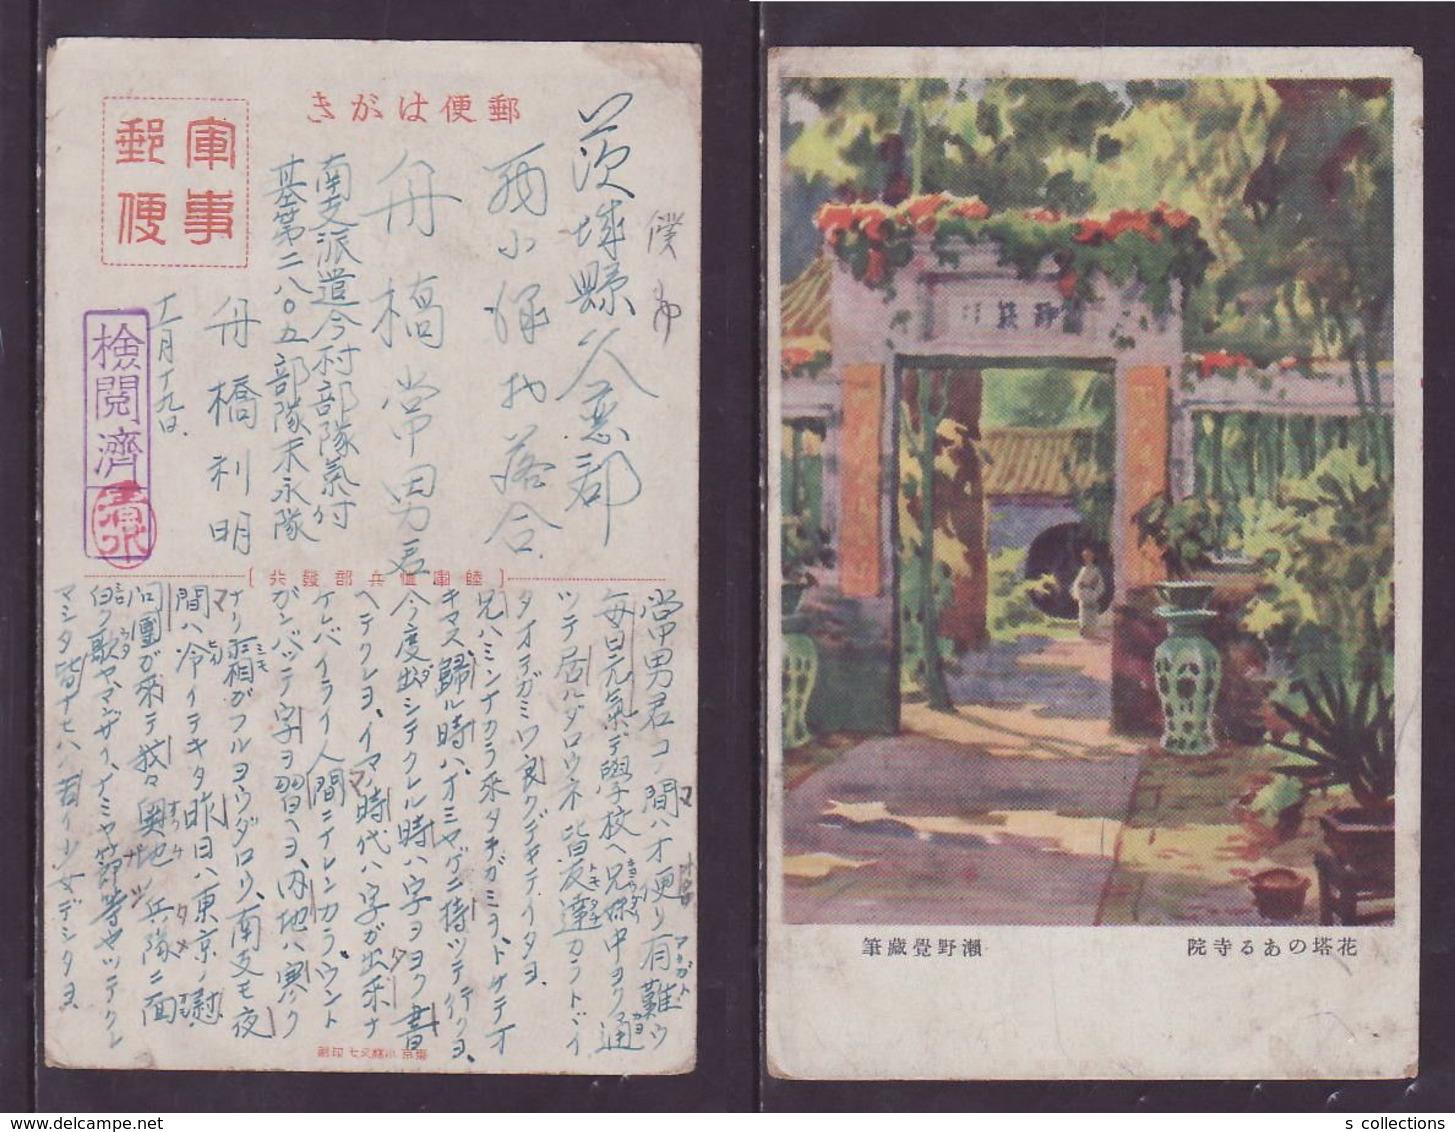 JAPAN WWII Military Flower Tower Temple Picture Postcard South China WW2 MANCHURIA CHINE MANDCHOUKOUO JAPON GIAPPONE - 1943-45 Shanghai & Nanjing